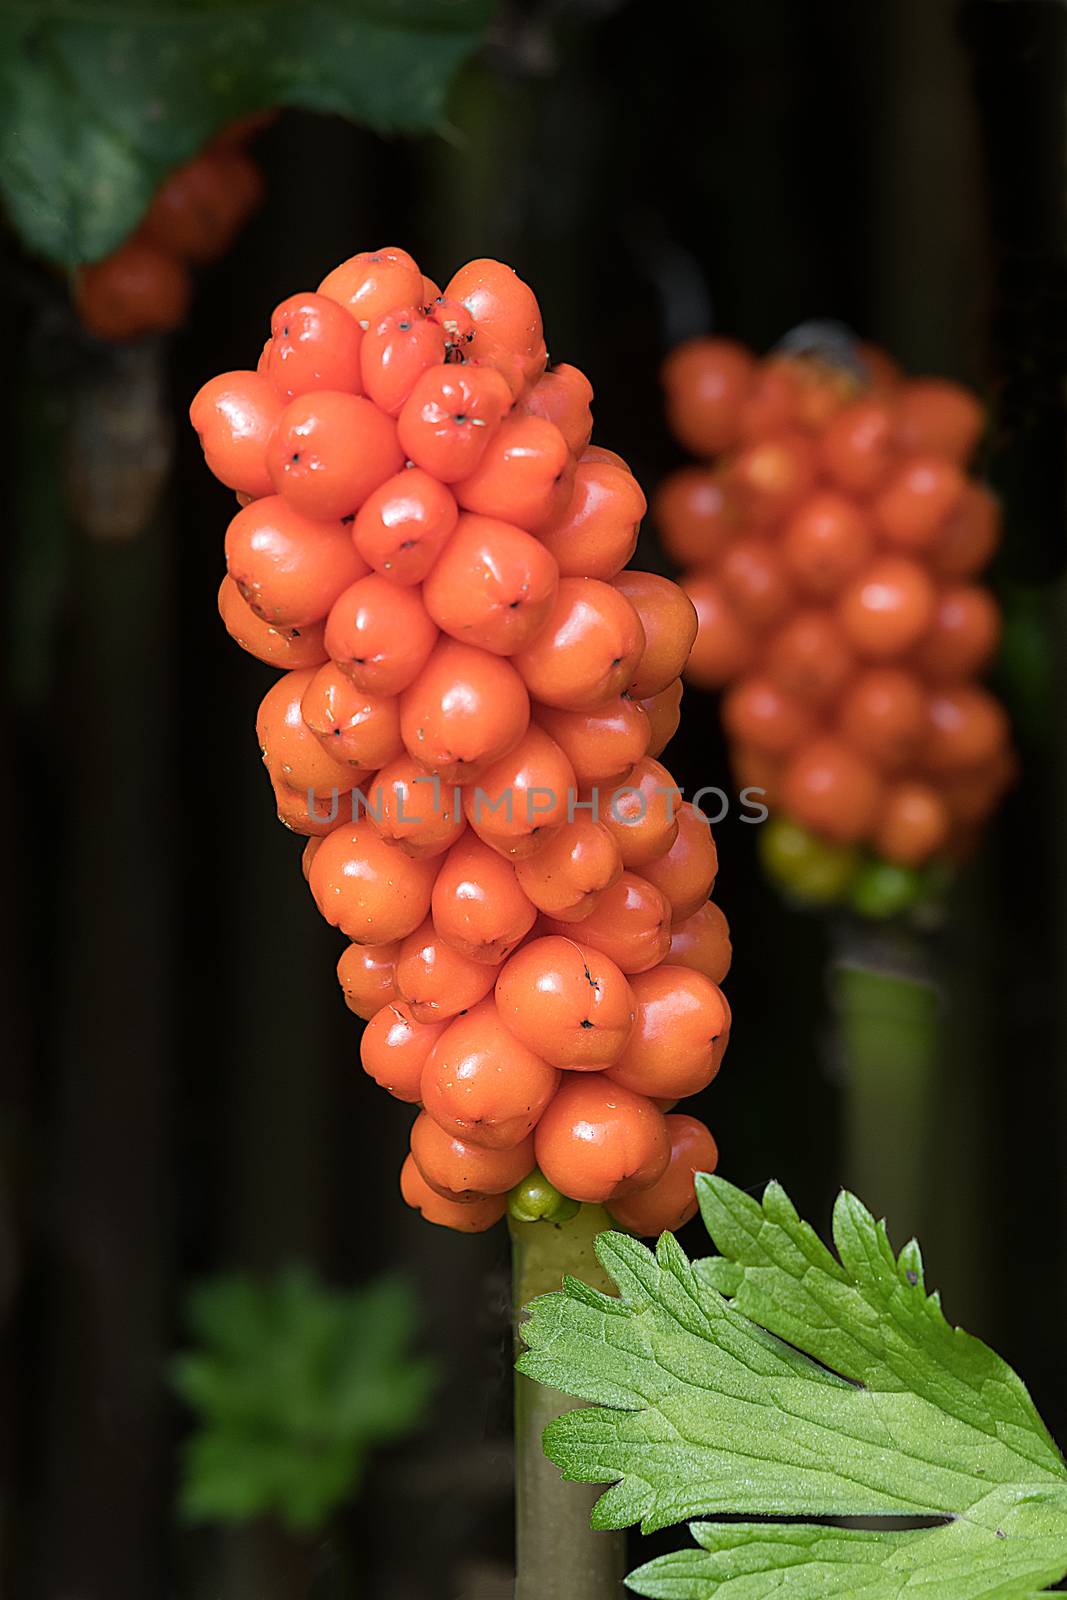 Arum maculatum is a common woodland plant. It is also known as snakeshead, adder's root, arum, wild arum, arum lily, lords-and-ladies, devils and angels, cows and bulls